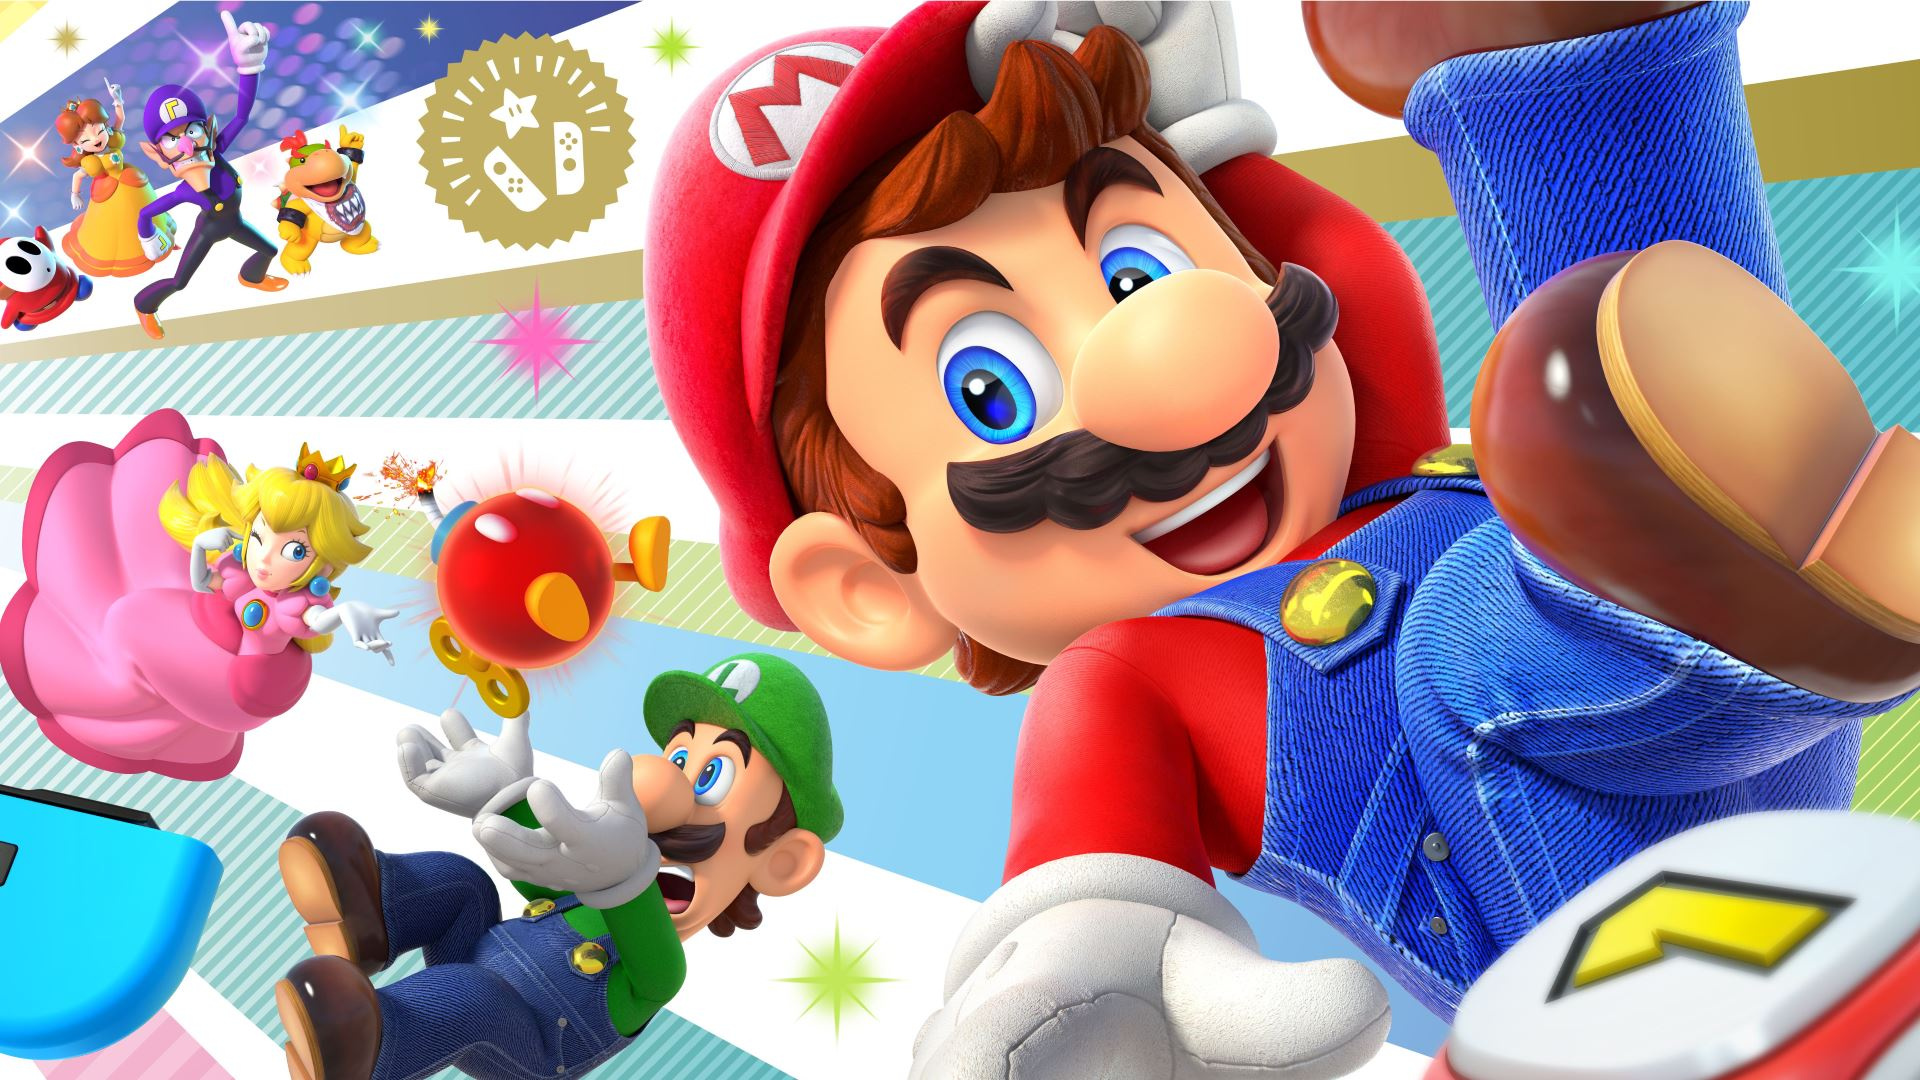 celebrate-super-mario-party-s-release-with-this-free-my-nintendo-wallpaper-in-europe-nintendo-life